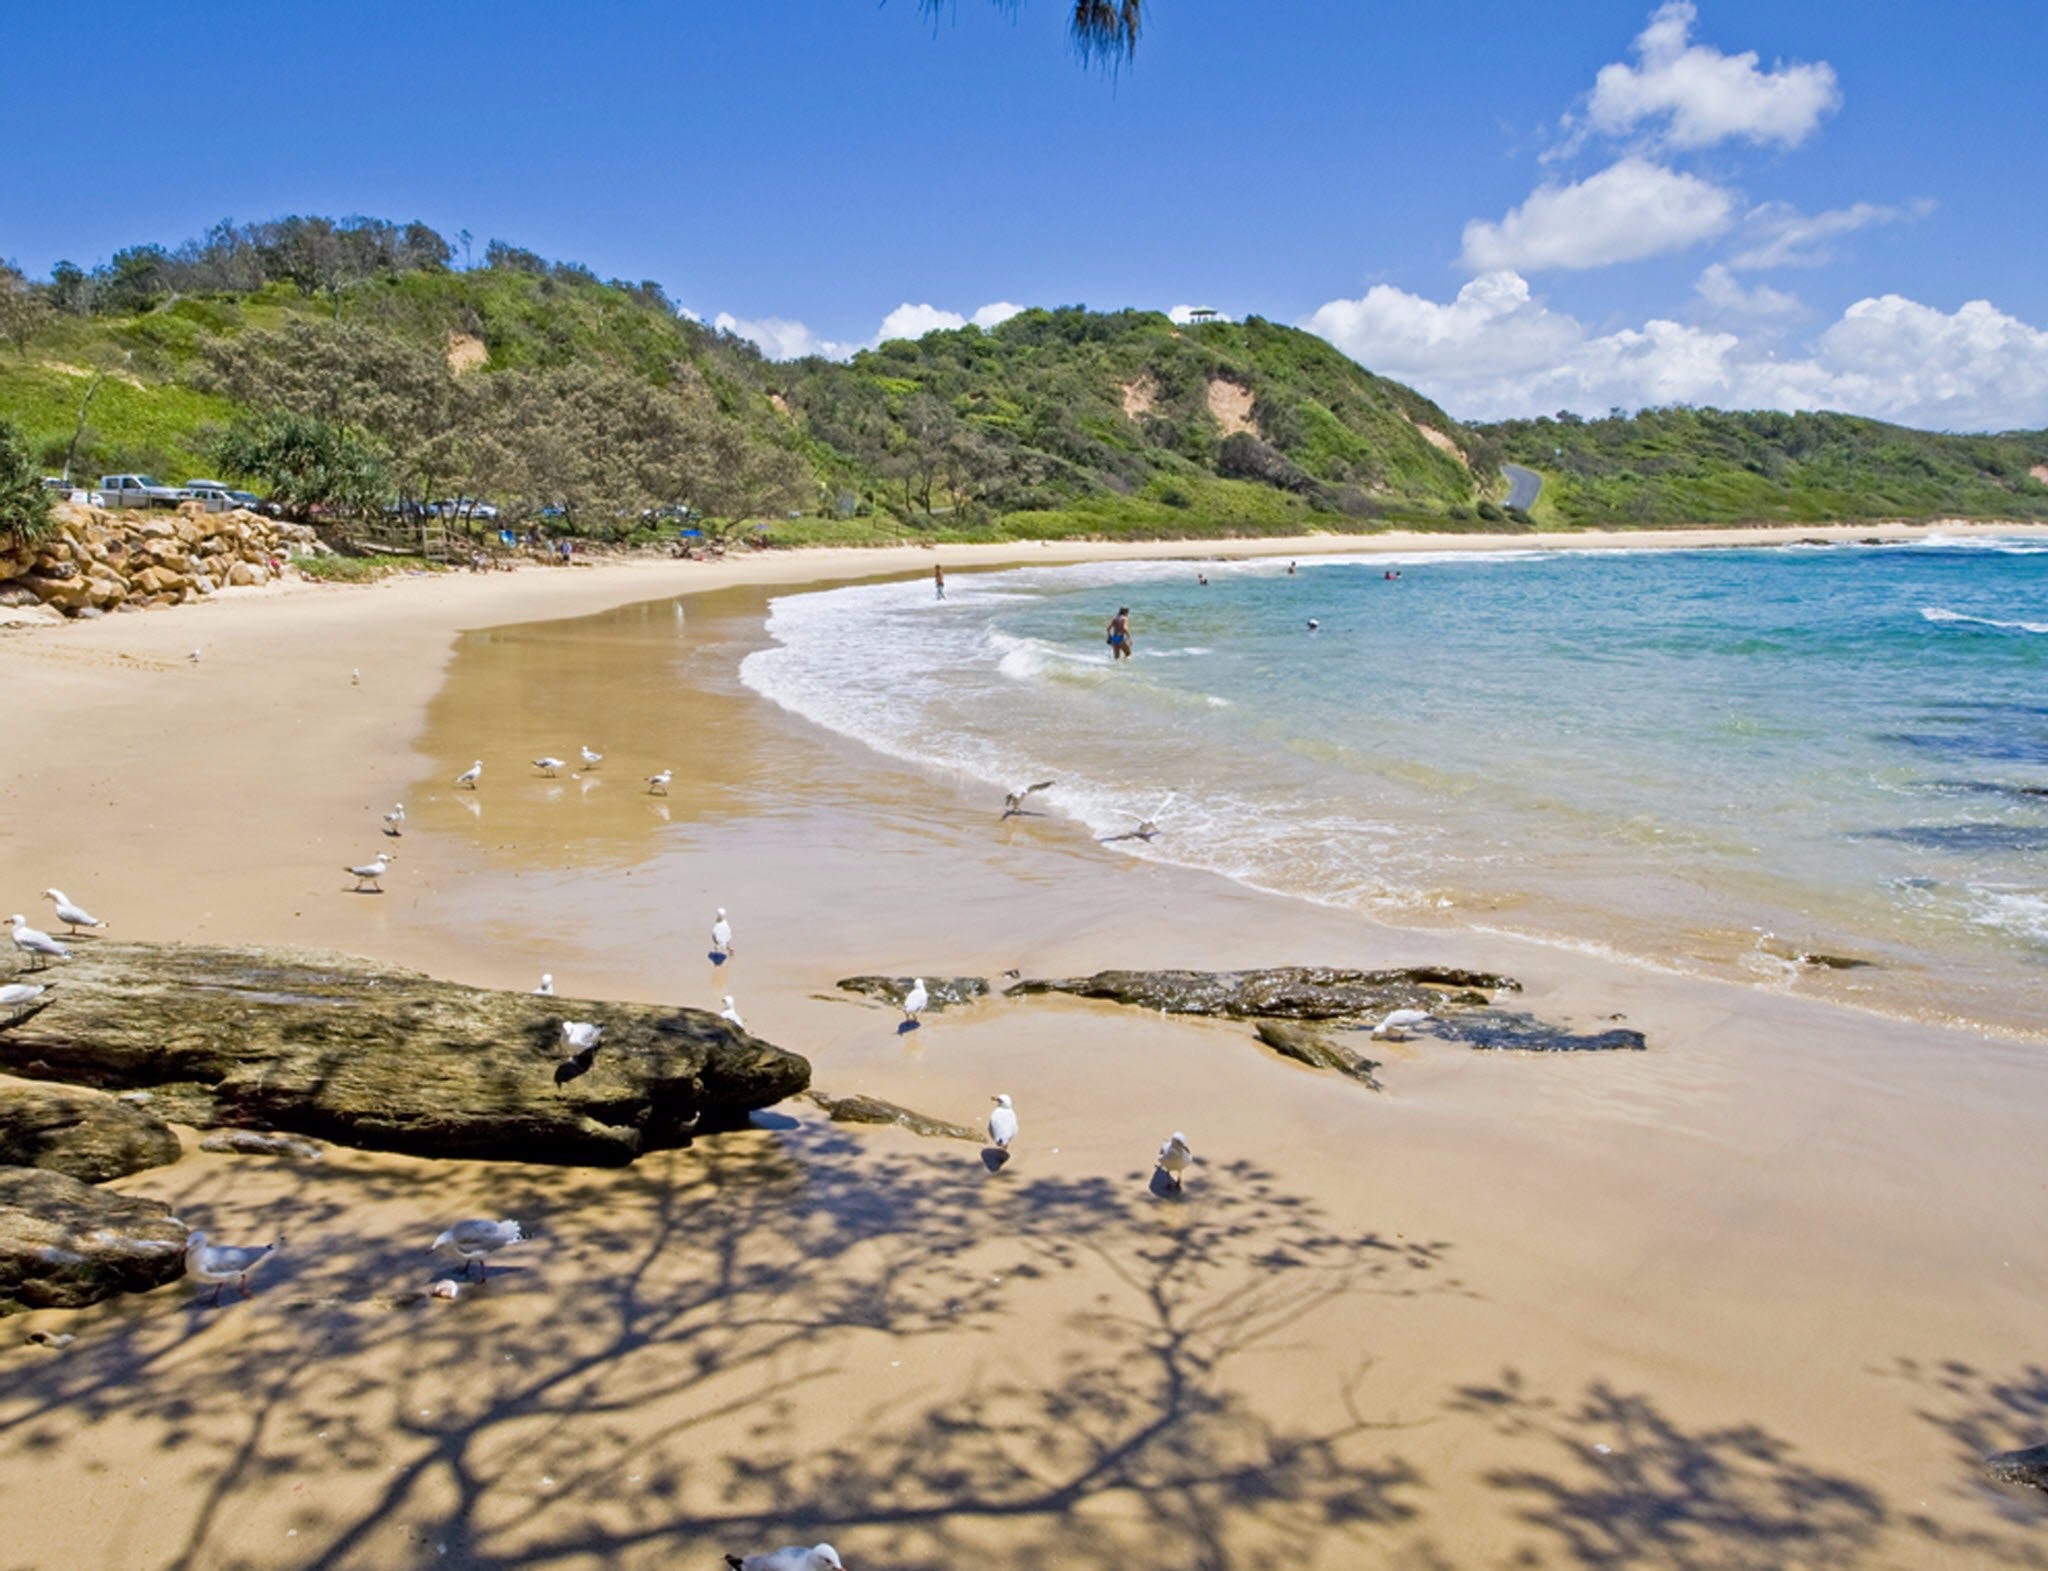 Nambucca Heads Beaches - Attractions Melbourne